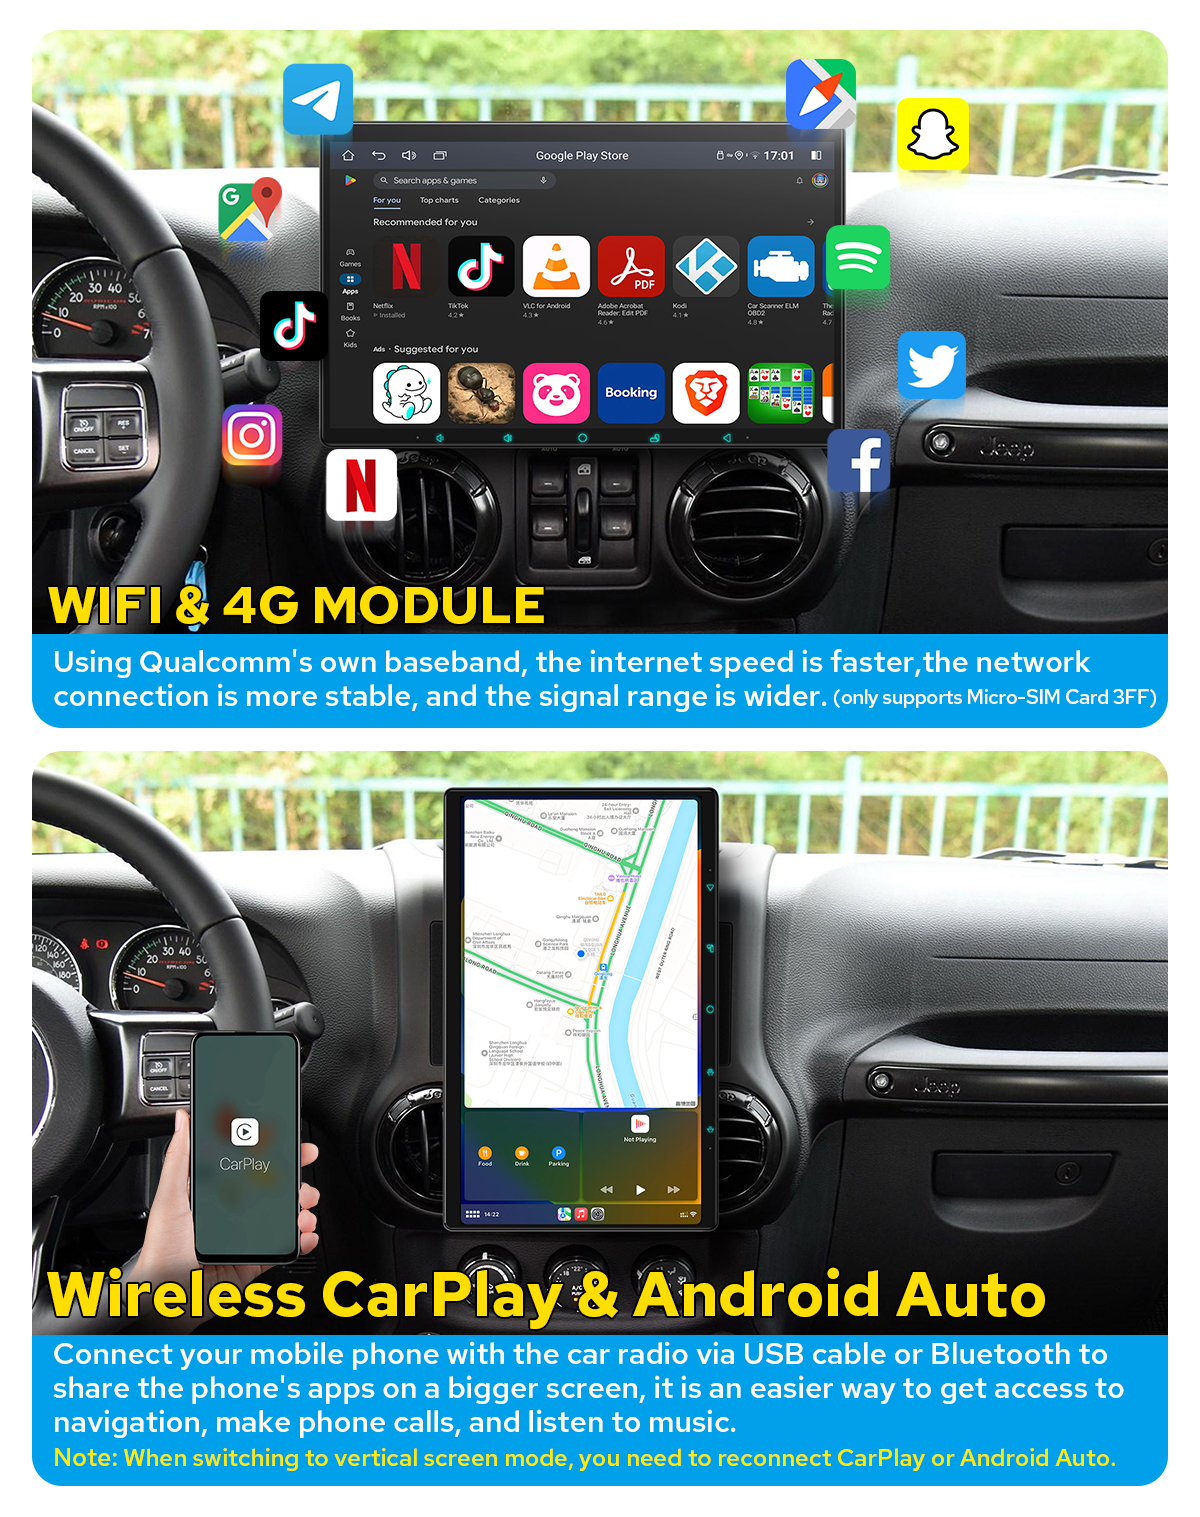 HD 15.1inch Rotatable Screen 1DIN Car Stereo Universal GPS CarPlay/Android Auto 